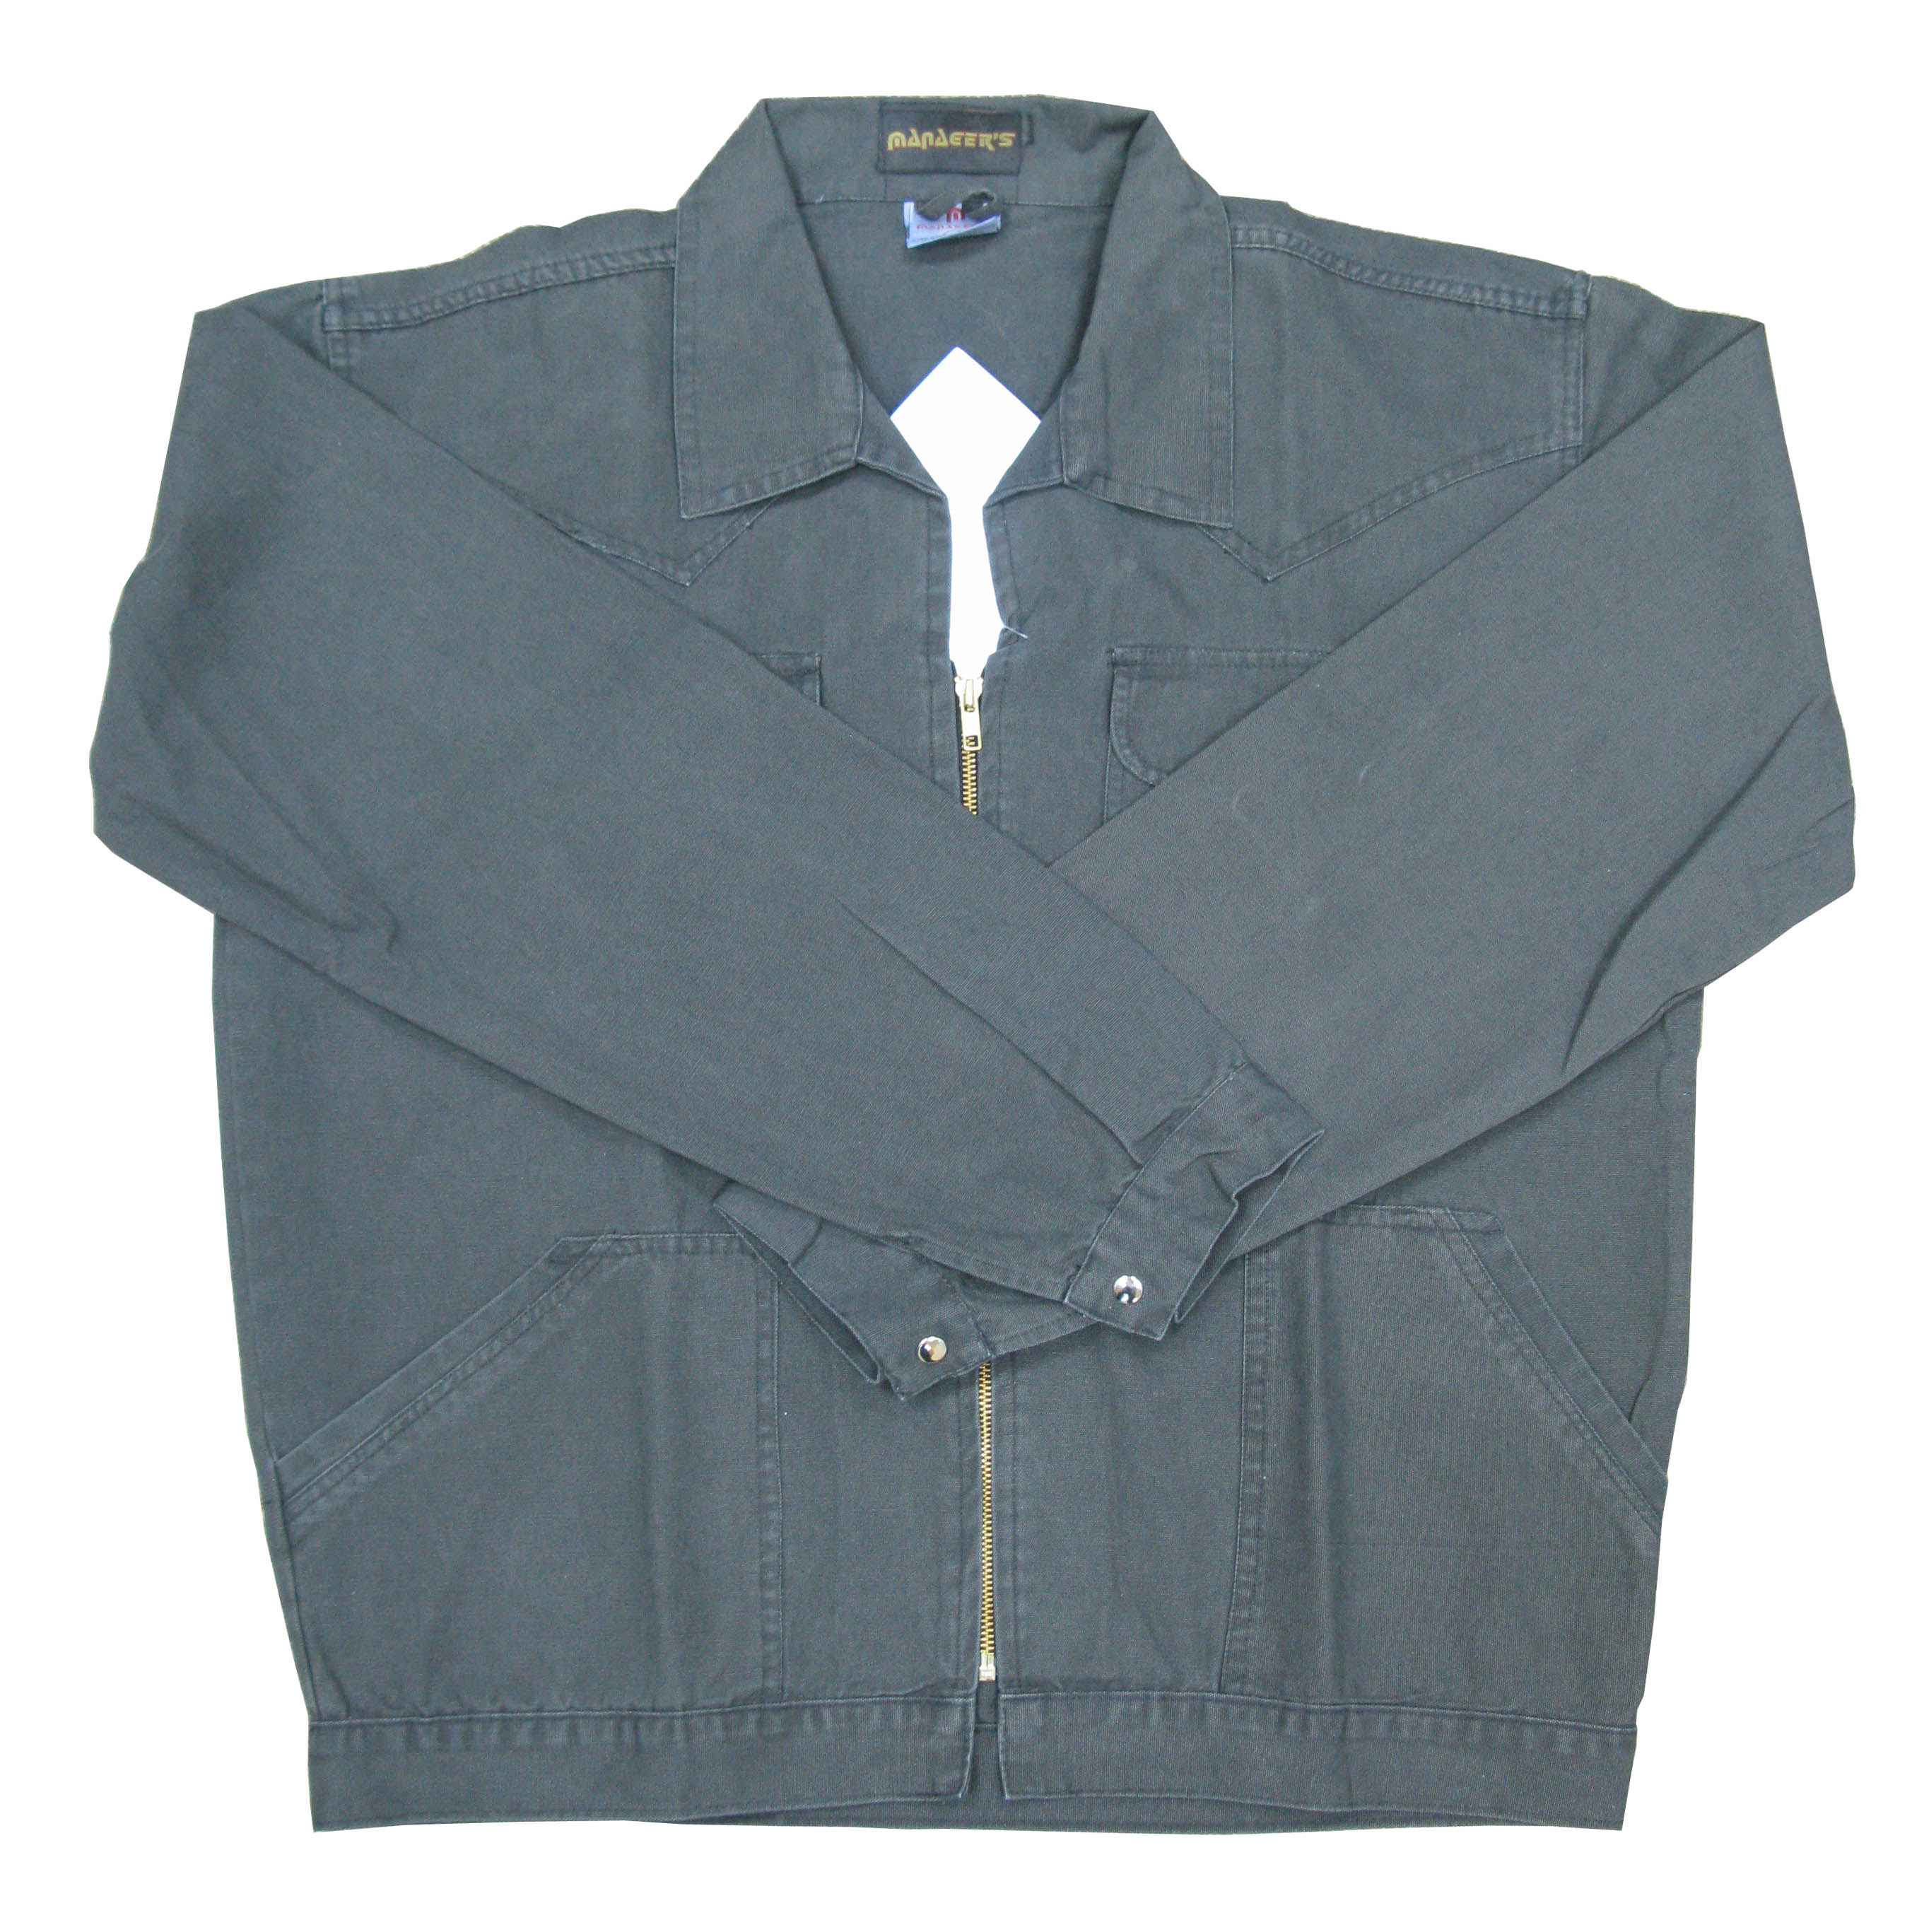  Manager’s Canvas Jacket - Canvas Workwear